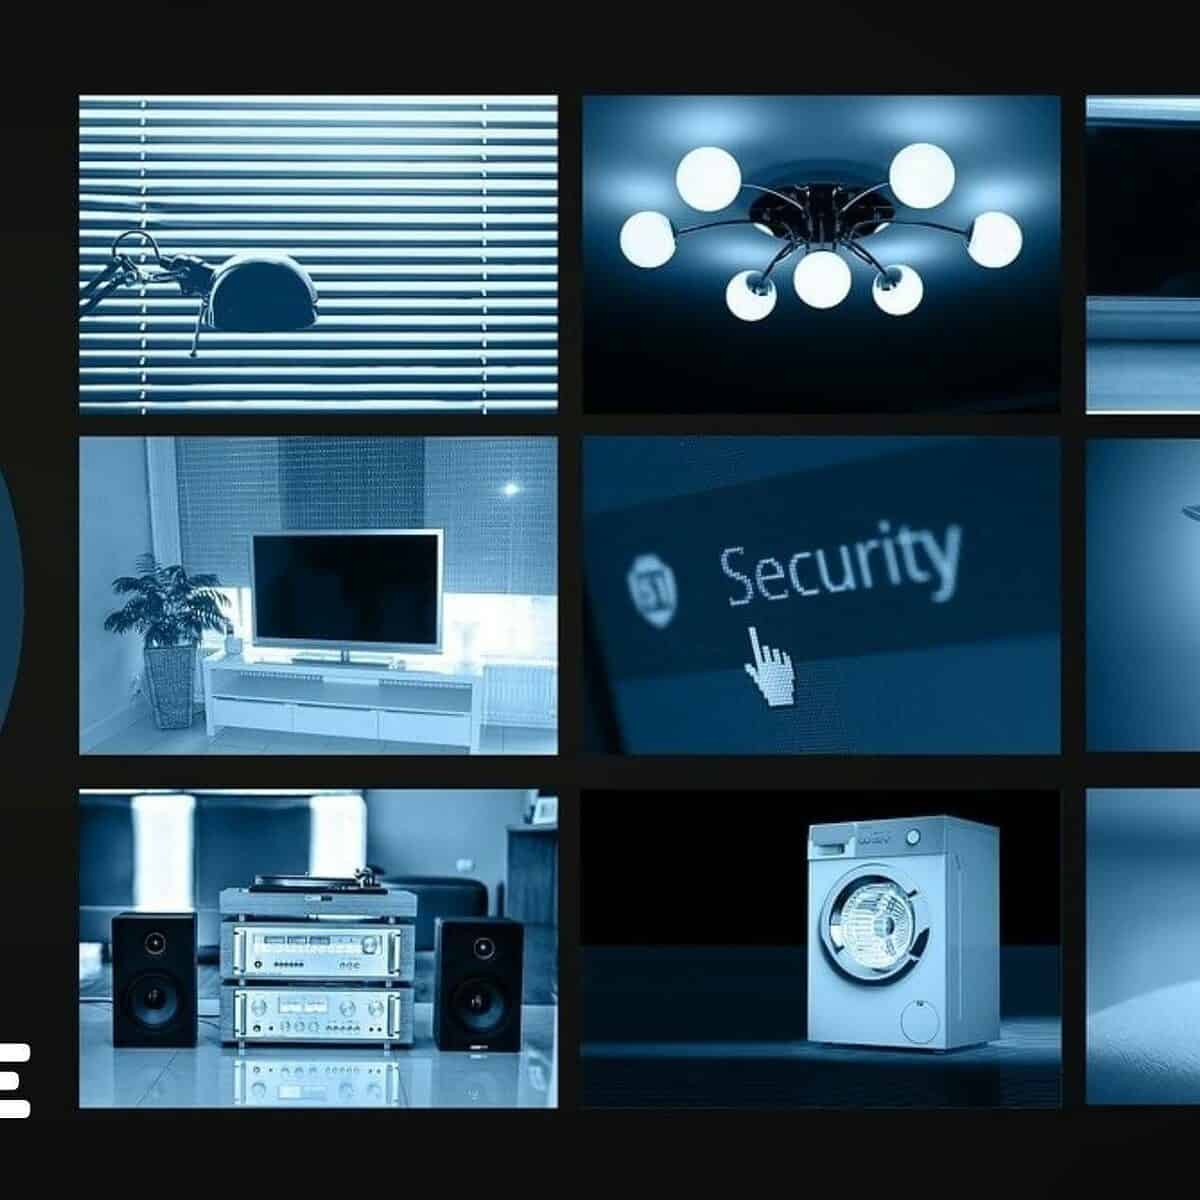 Read more about the article 9 Top home automation companies in India